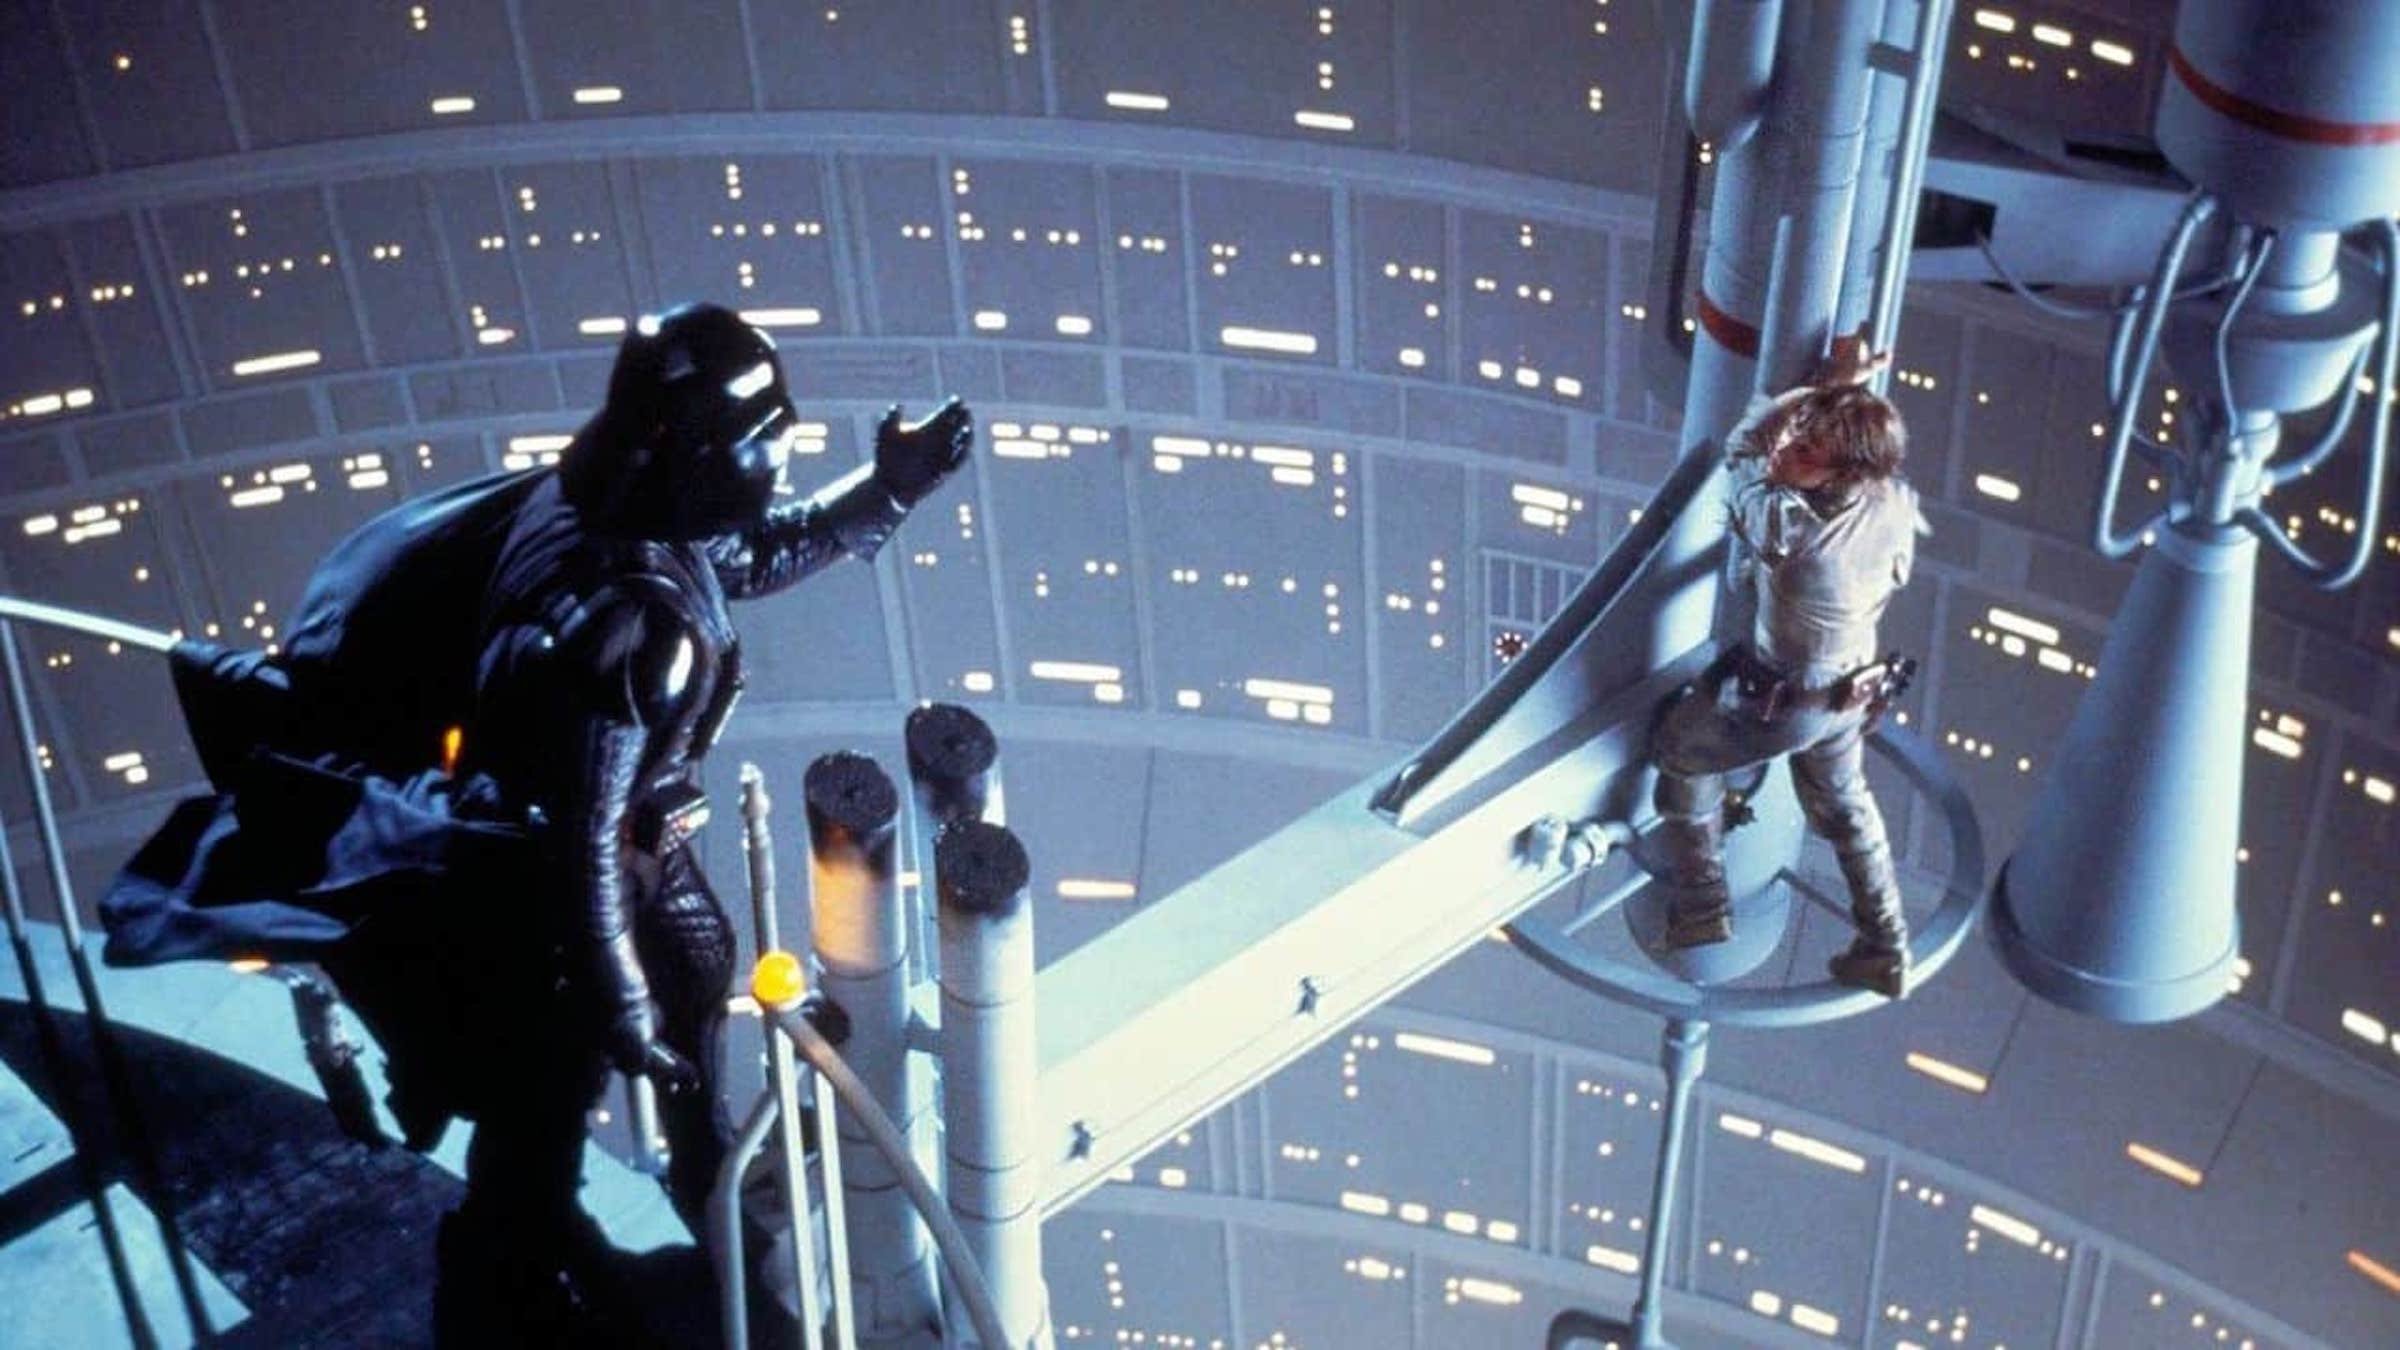 Darth Vader revealing the truth to Luke in 'Star Wars The Empire Strikes Back'